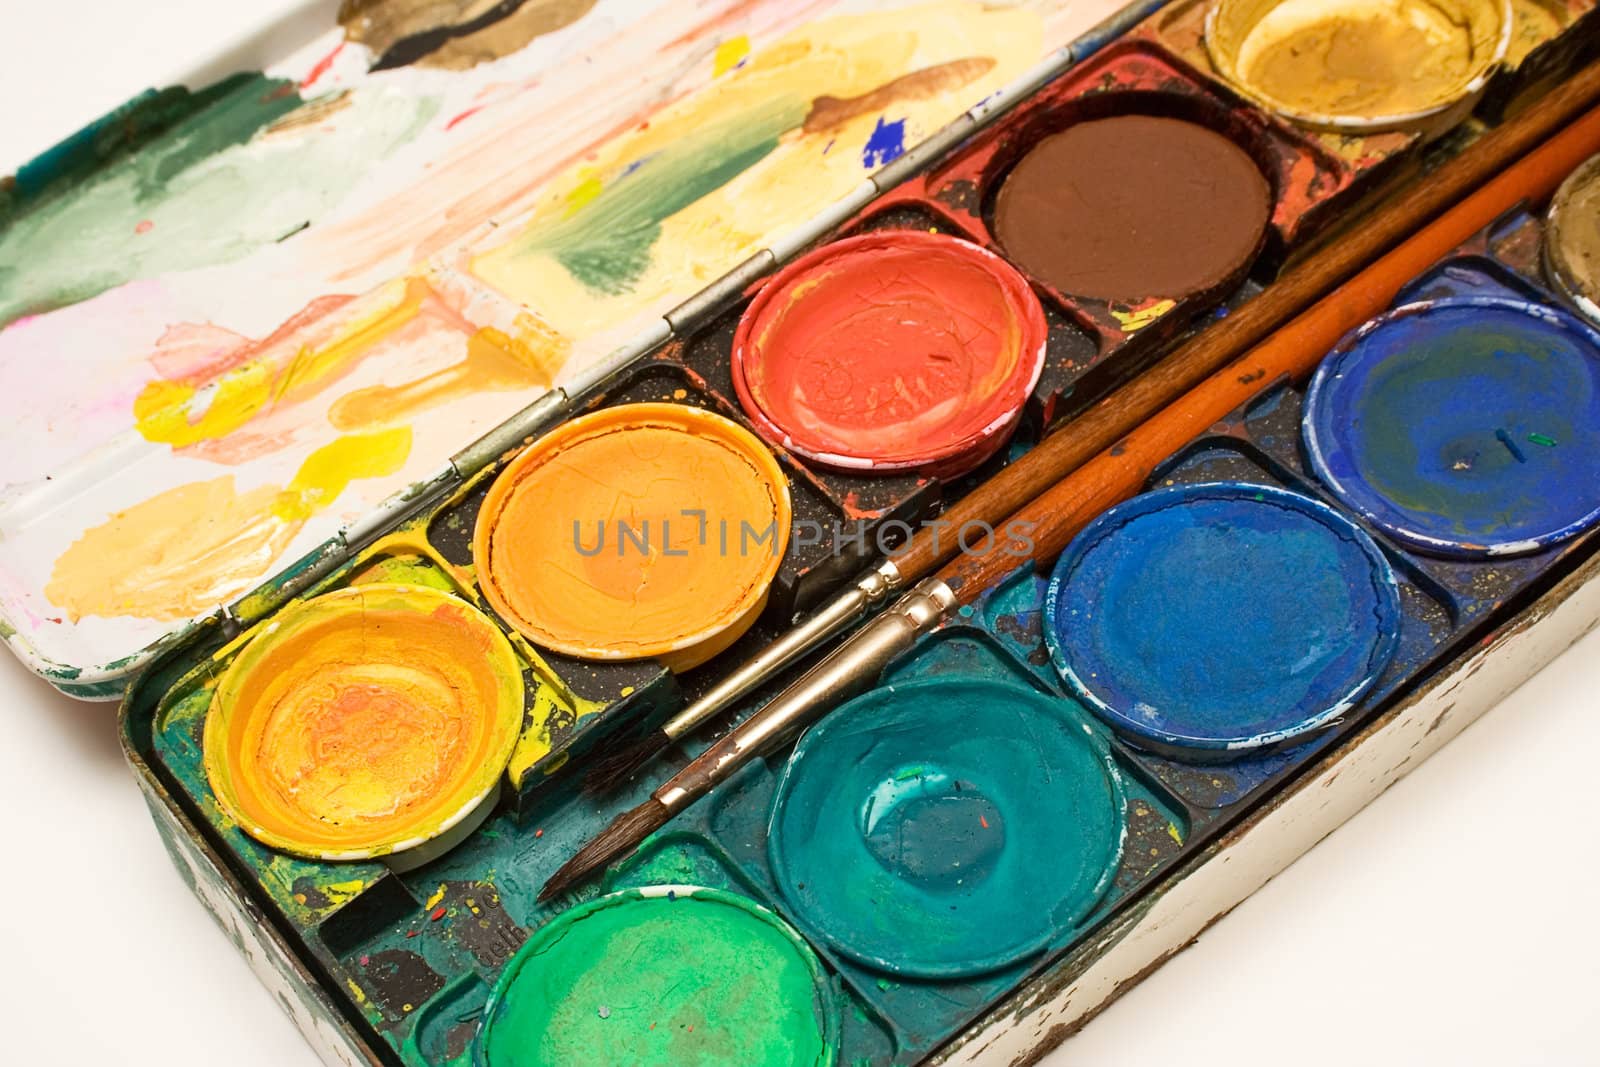 Box of Watercolors by winterling